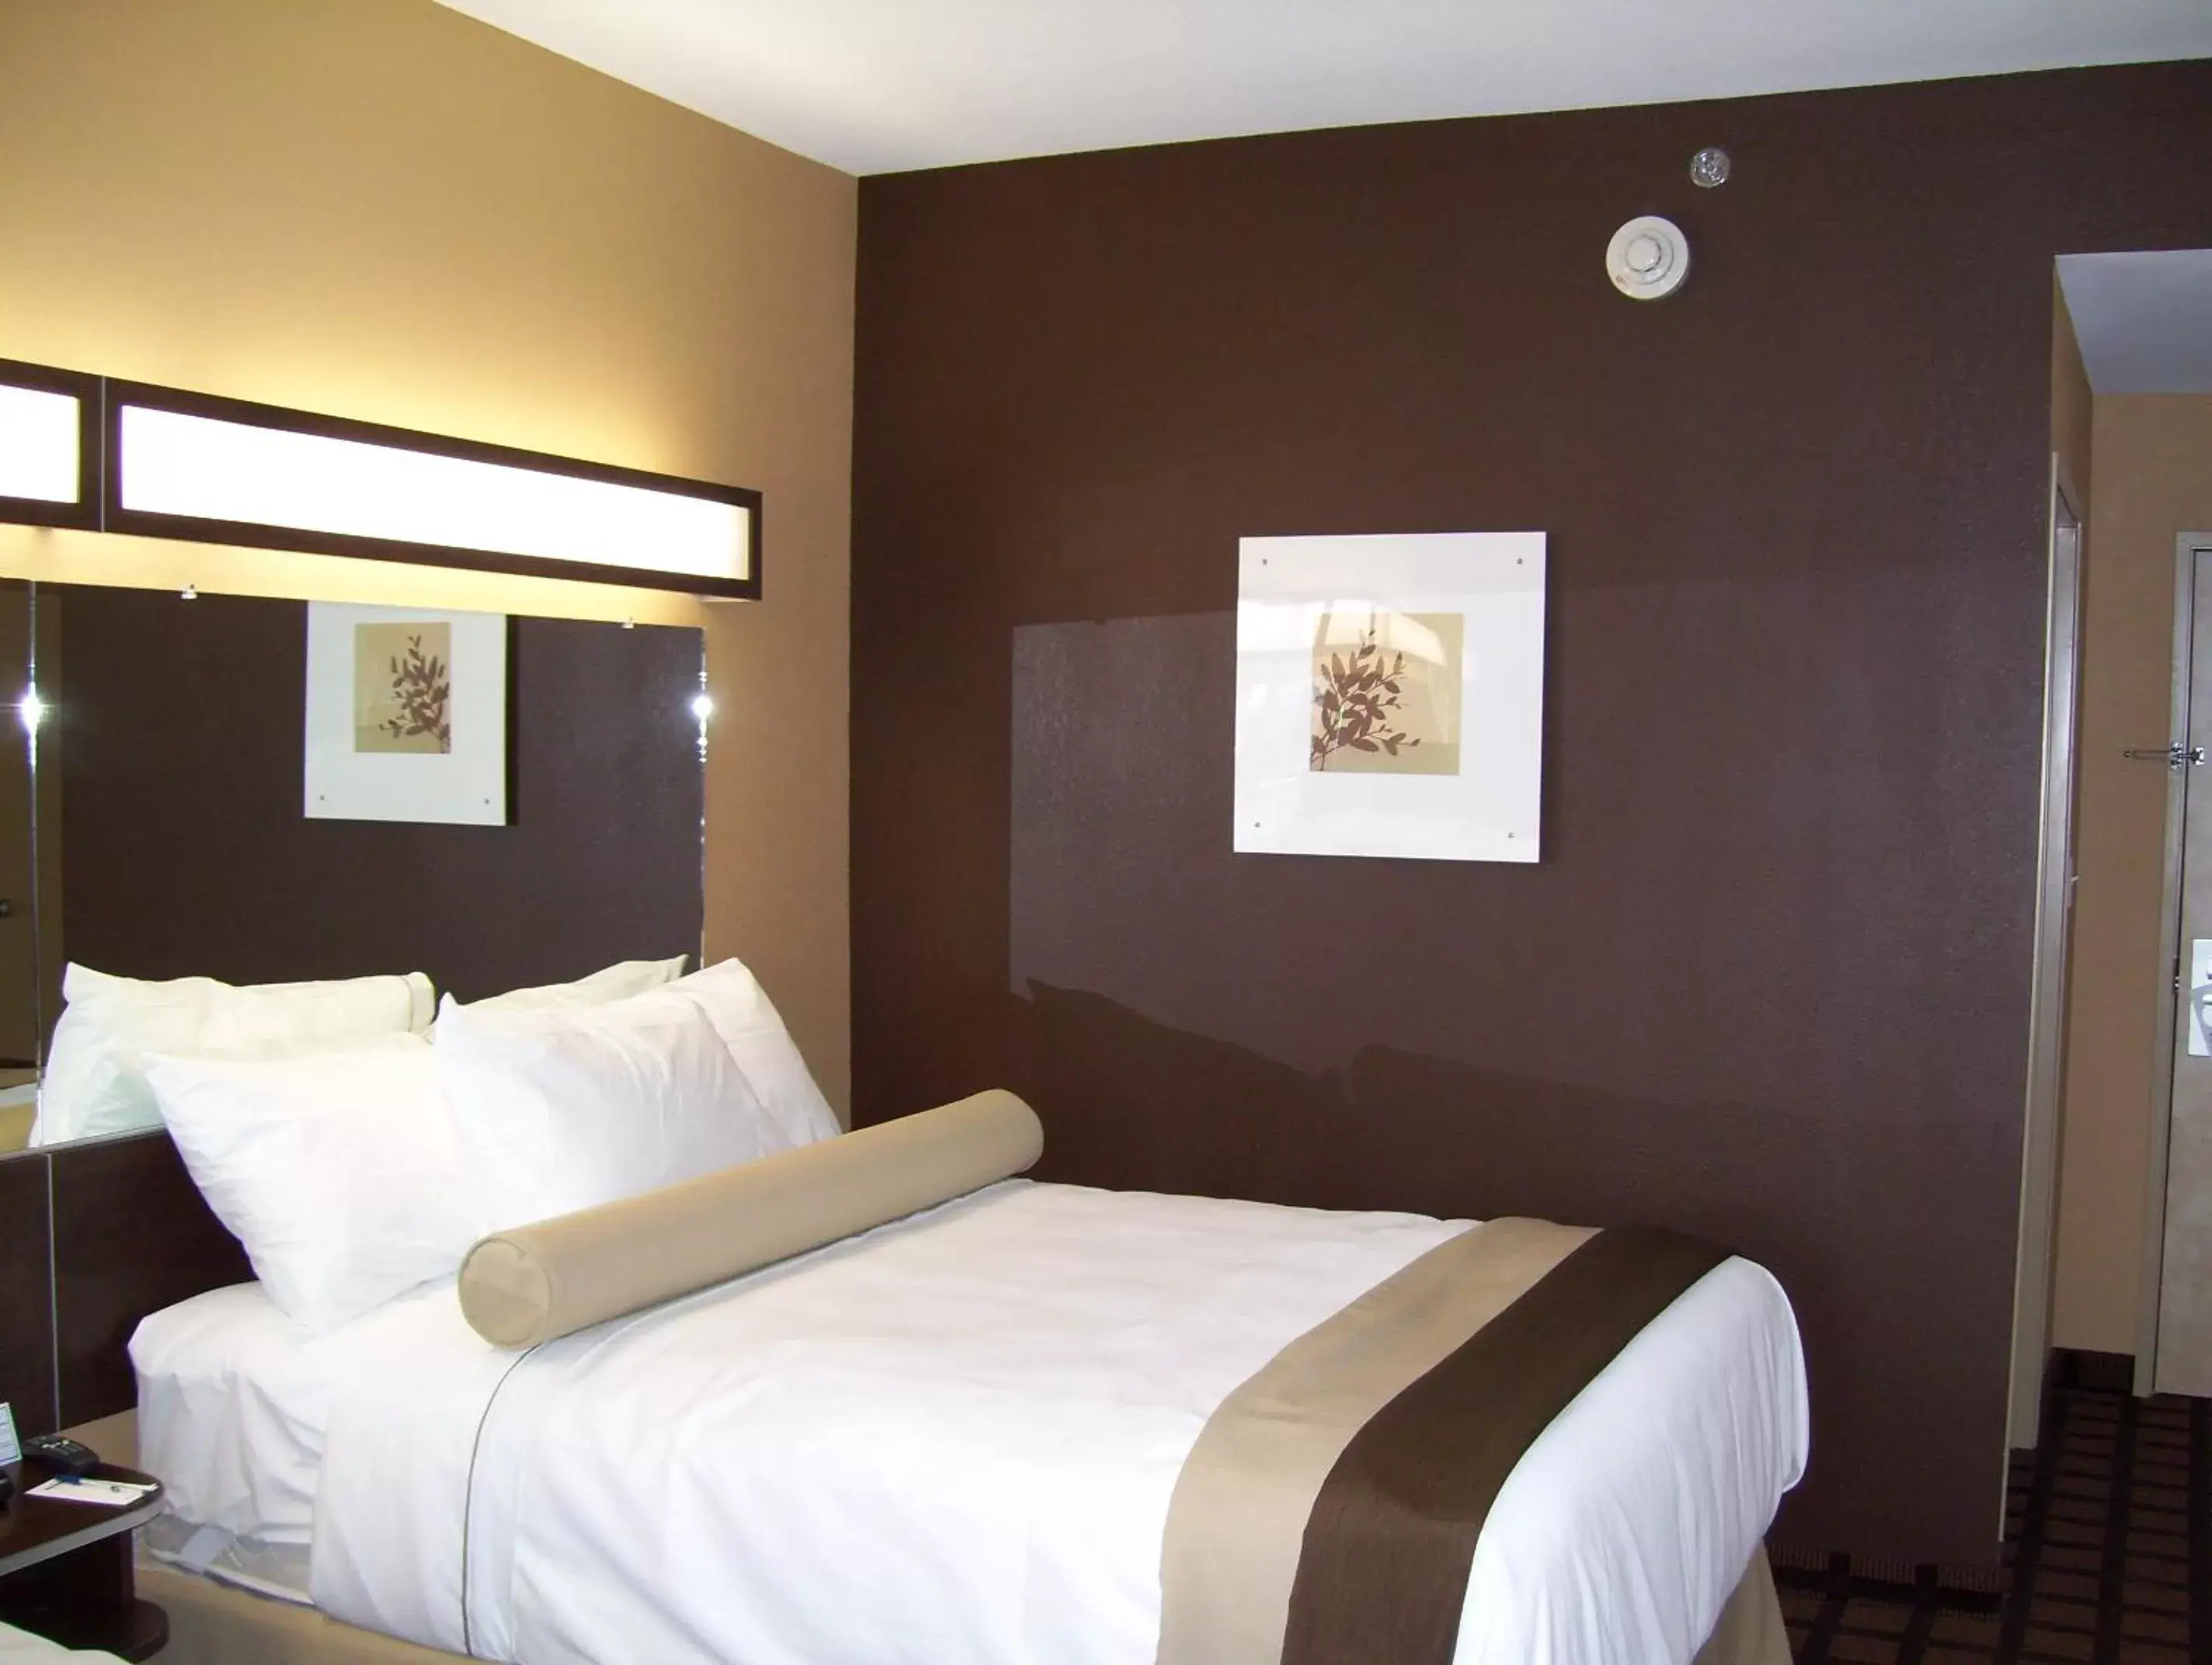 Bed, Room Photo in Microtel Inn & Suites Quincy by Wyndham